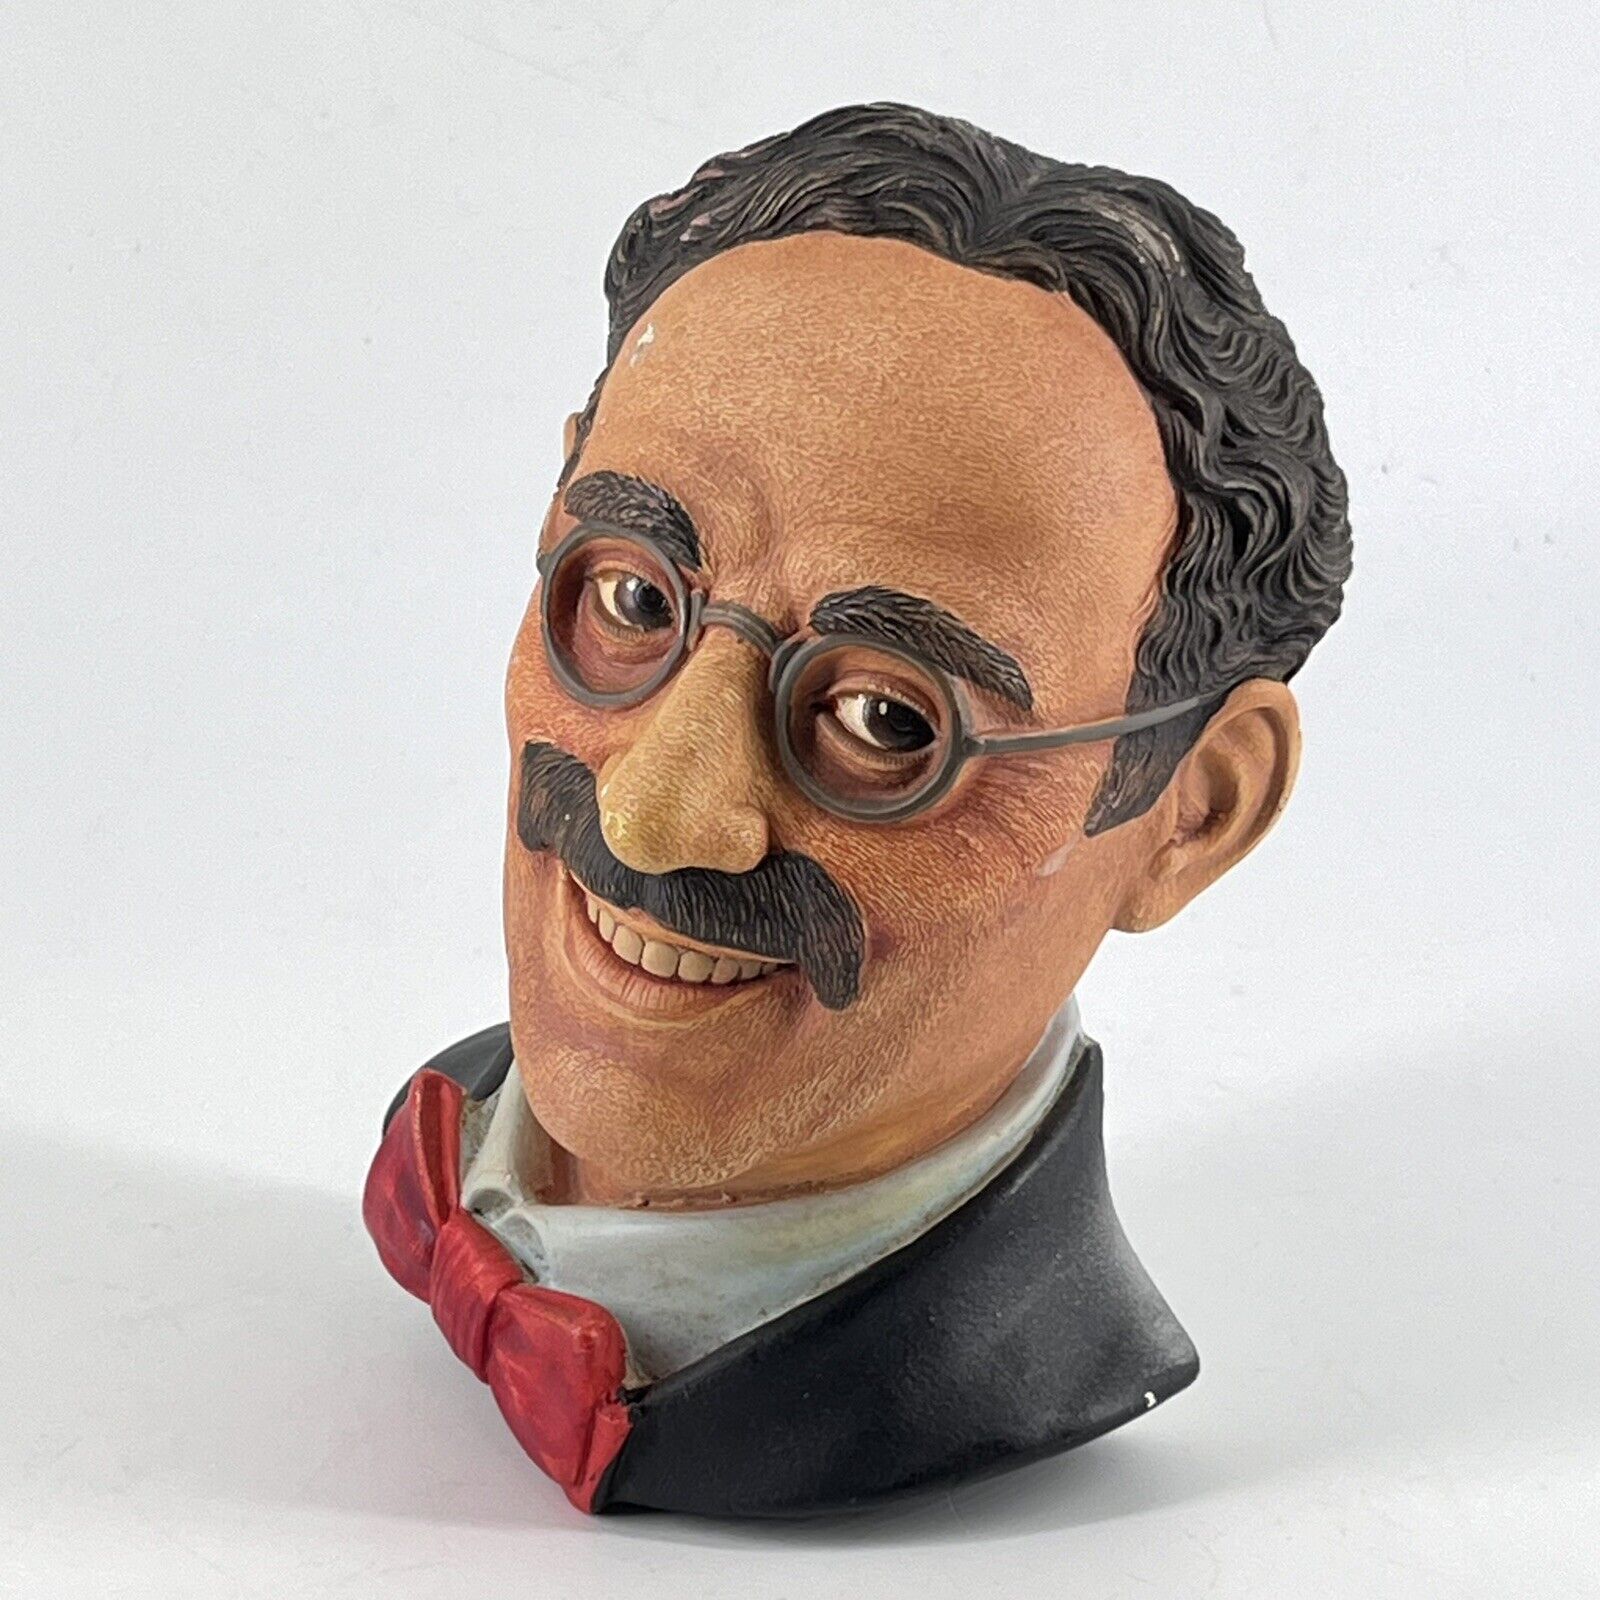 Groucho Marx Legend Products Chalkware Wall Plaque Figurine England Bossons Era